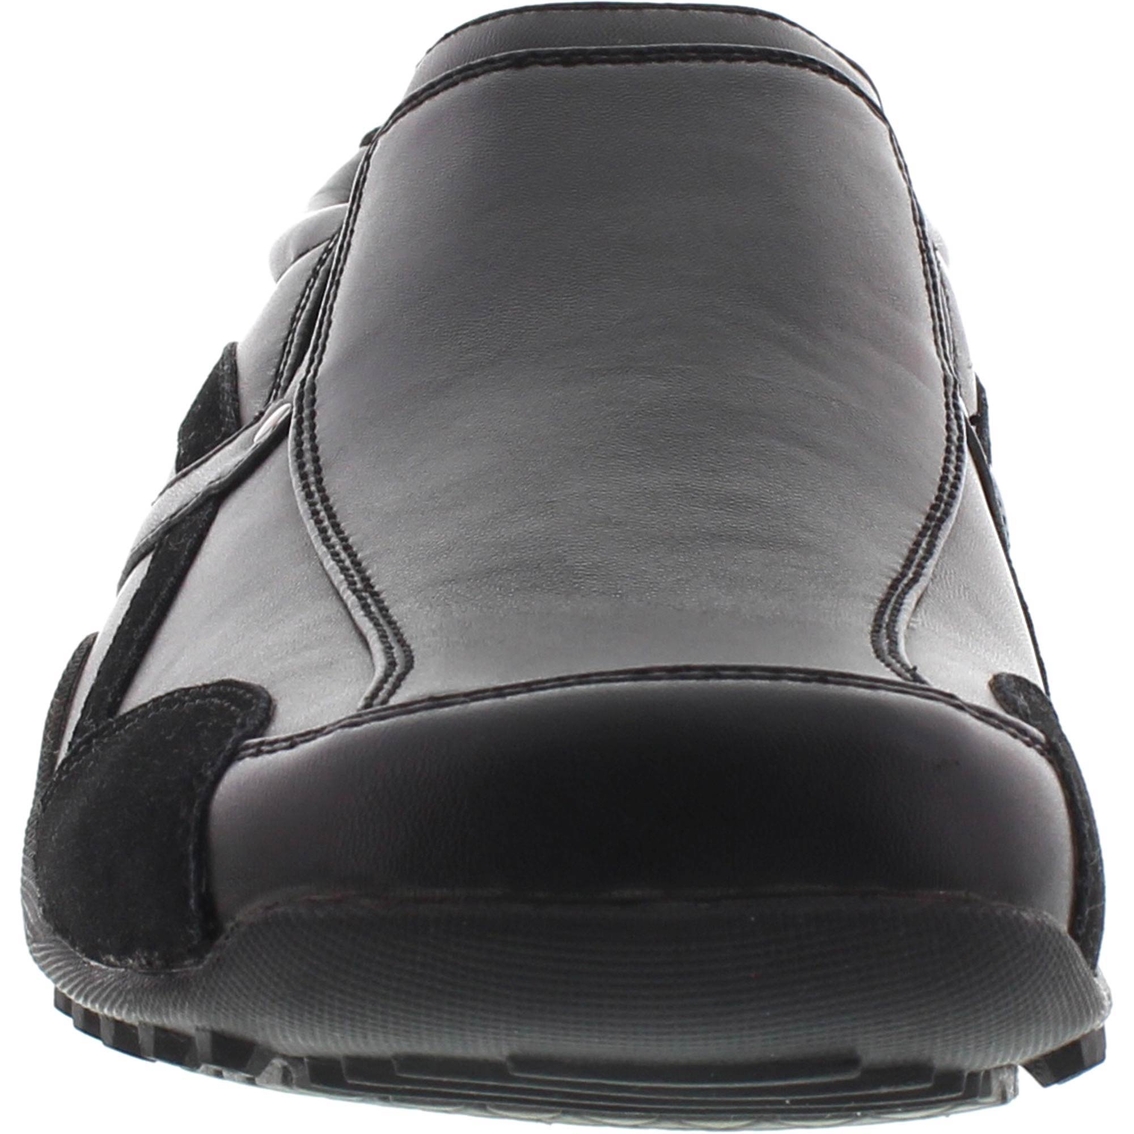 Deer Stags Animal Slip On Shoes - Image 3 of 4